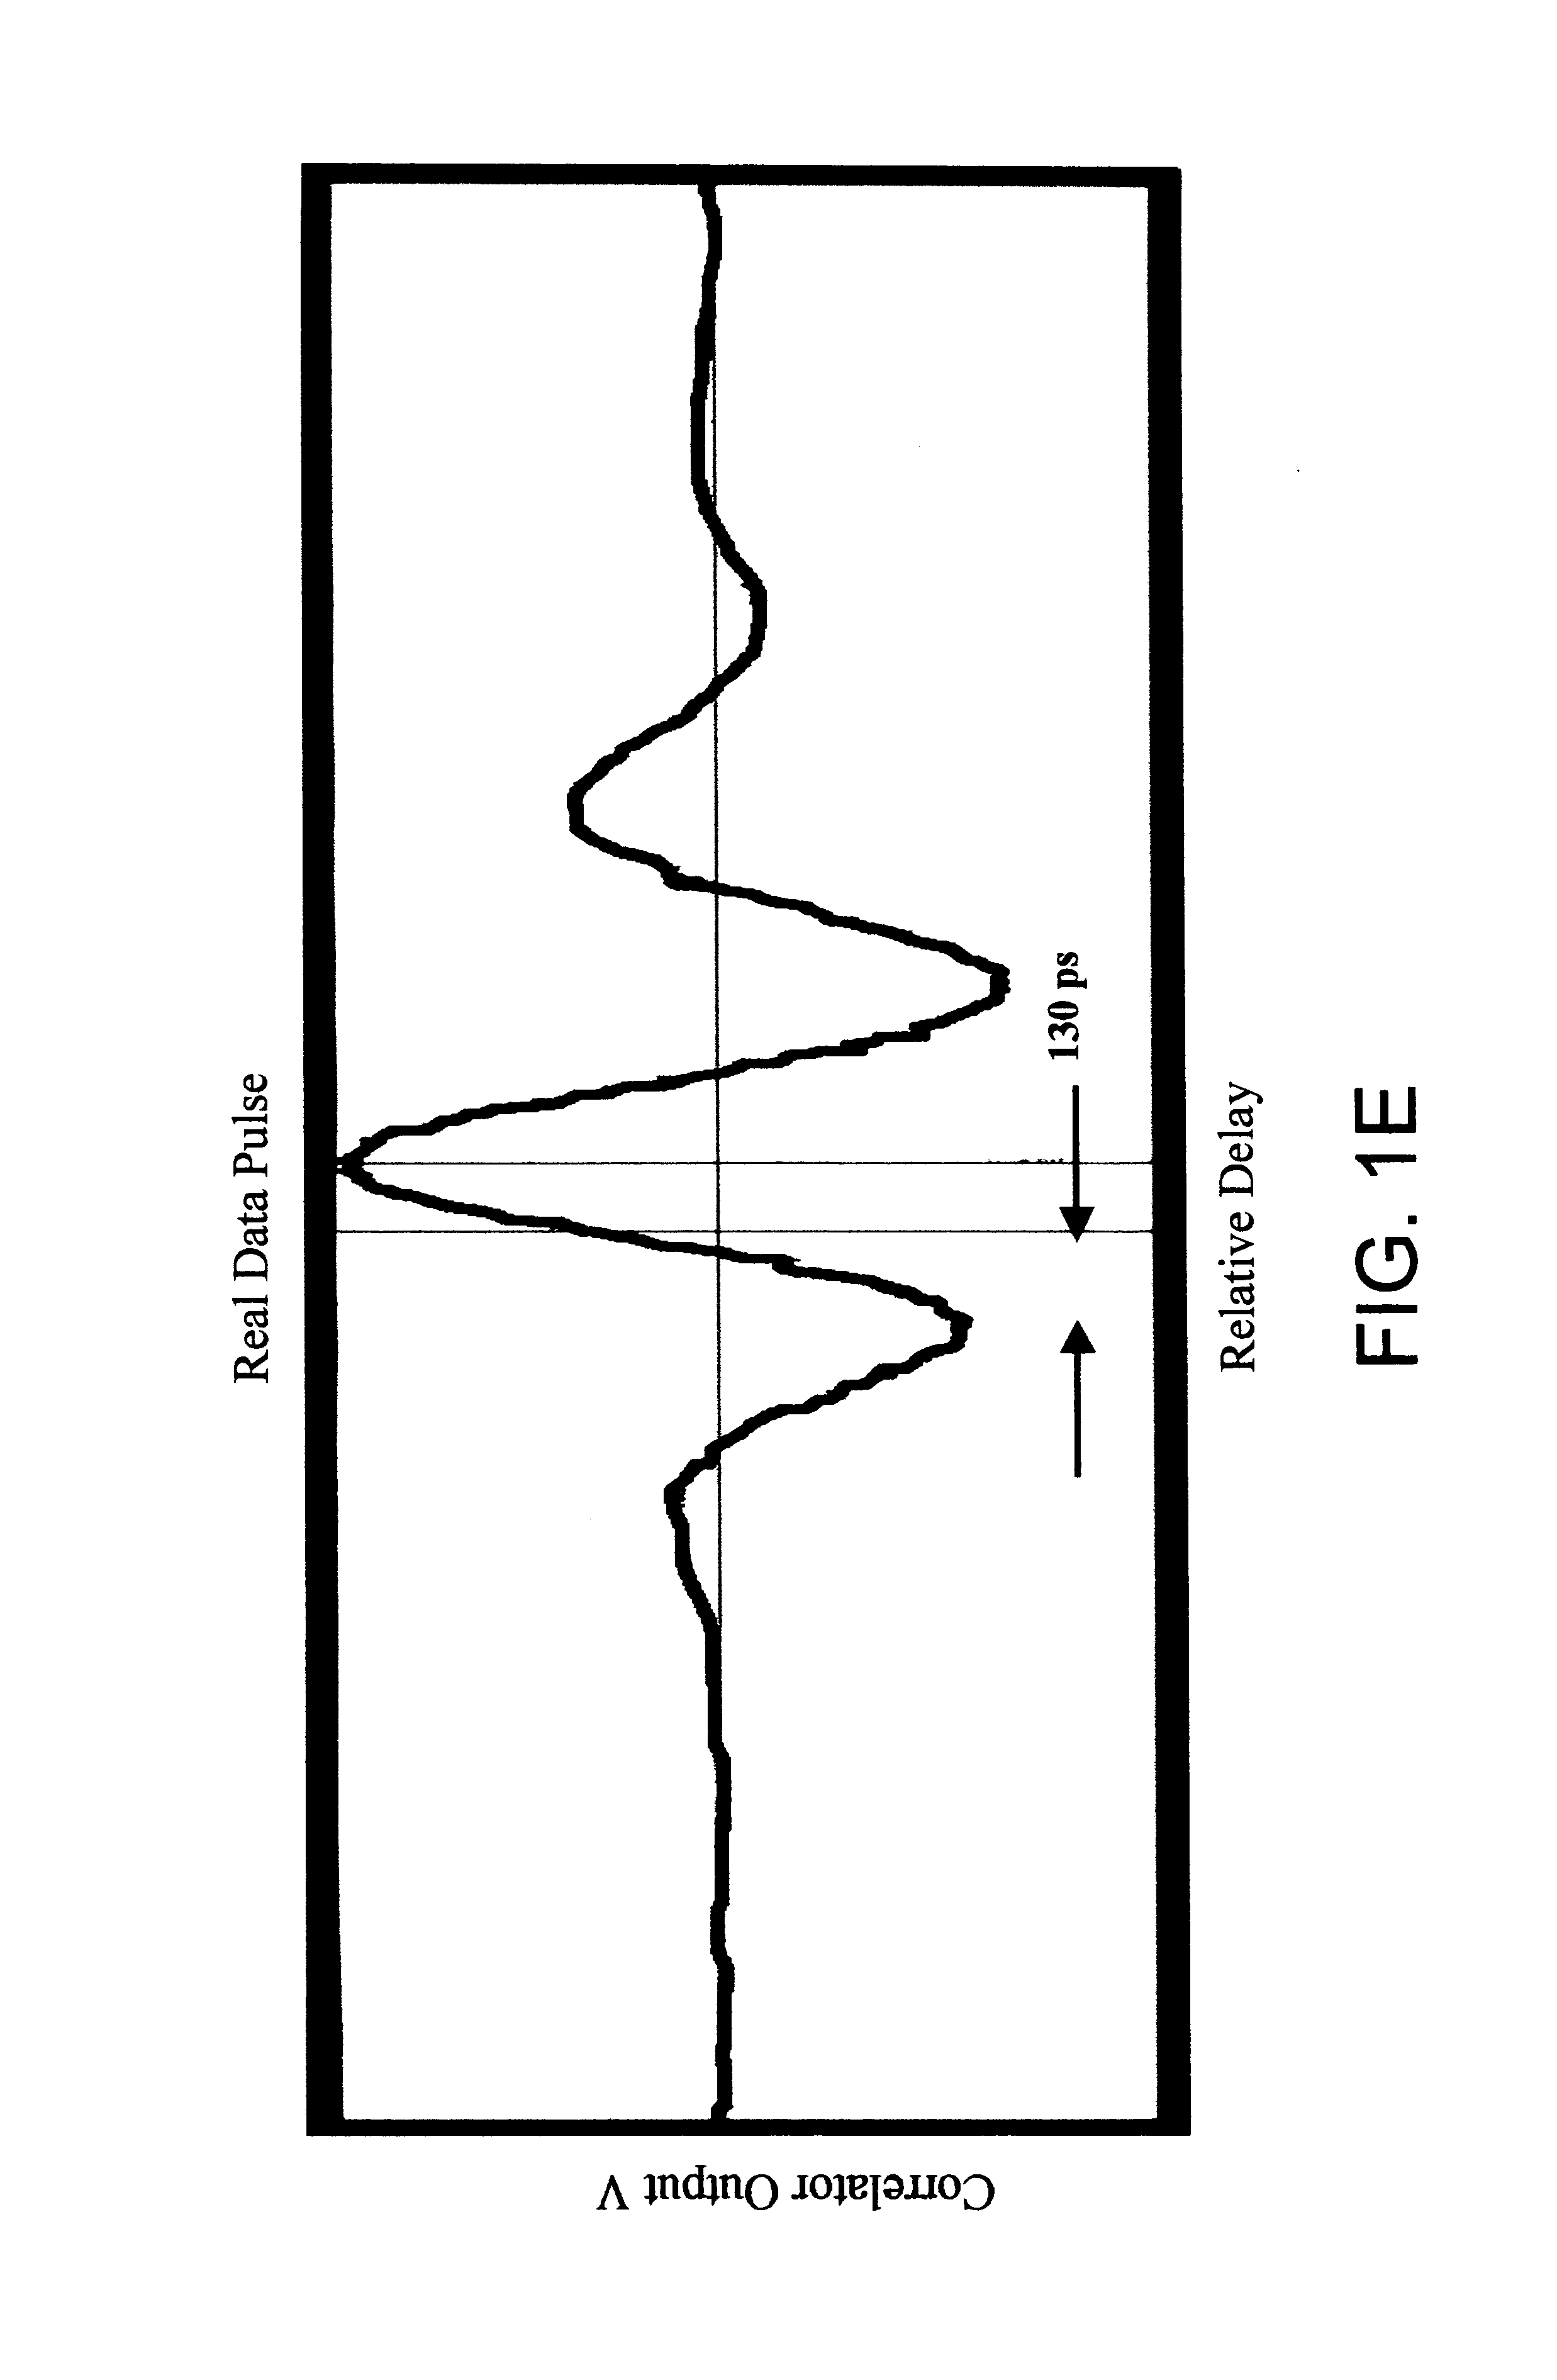 System and method for detecting an intruder using impulse radio technology